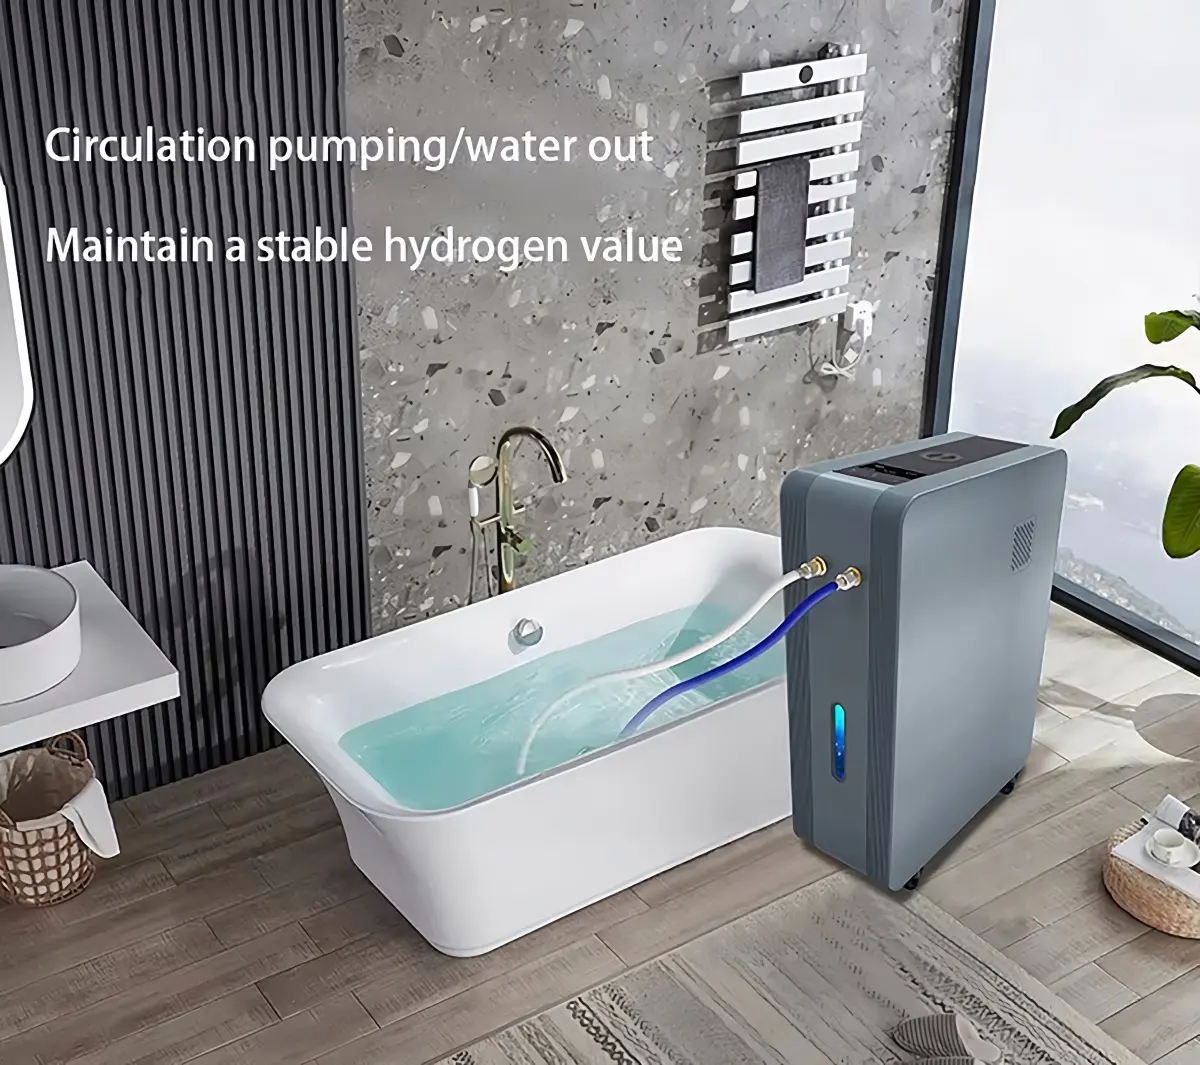 Hydrotherapy Generator for Baths 4700ml/min Water Output Up to 2600PPB Hydrogen-Rich Water Spa H2 Bubble Bath Machine